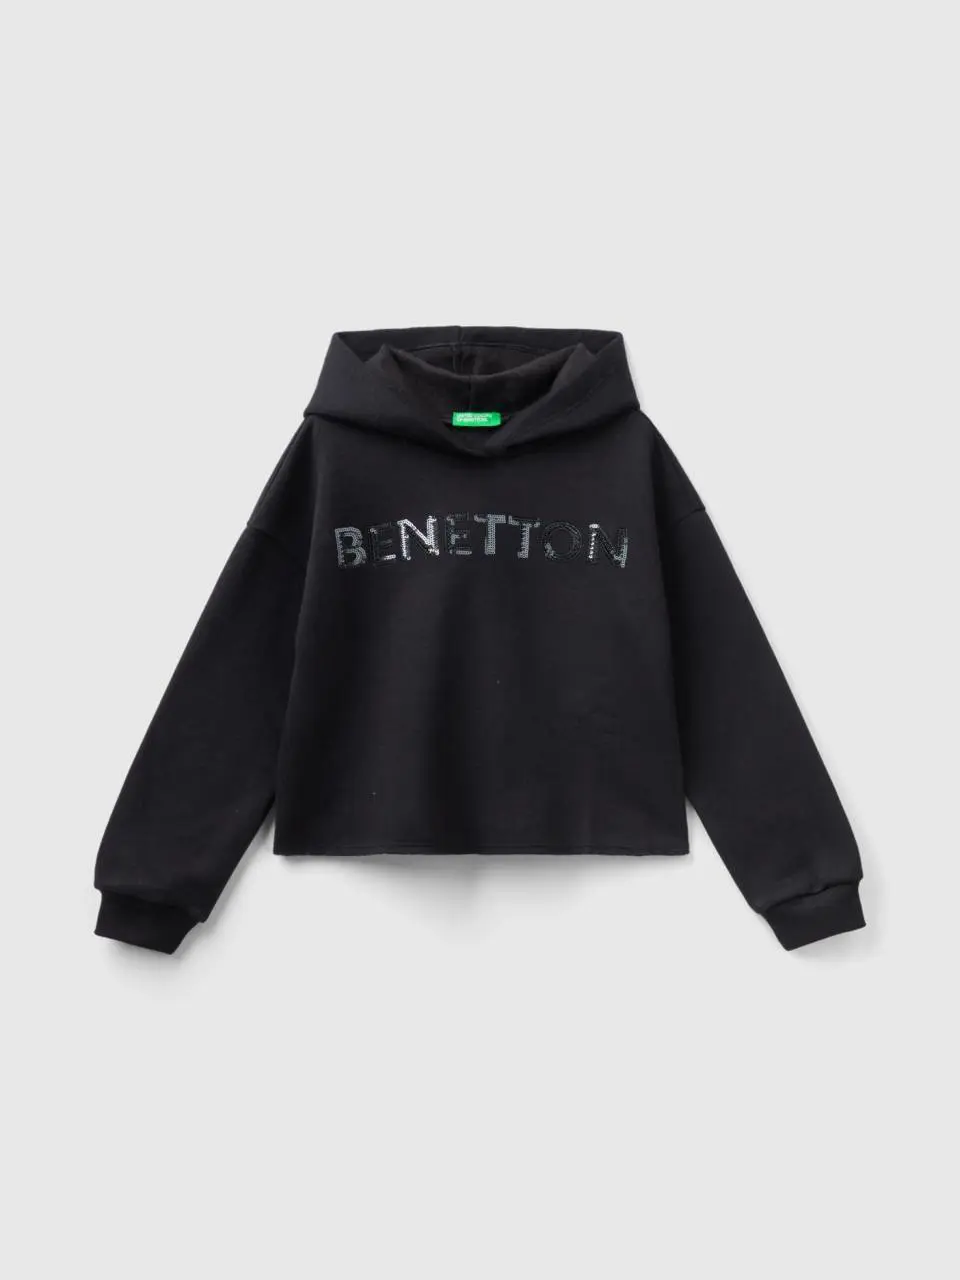 Benetton hoodie with sequins. 1